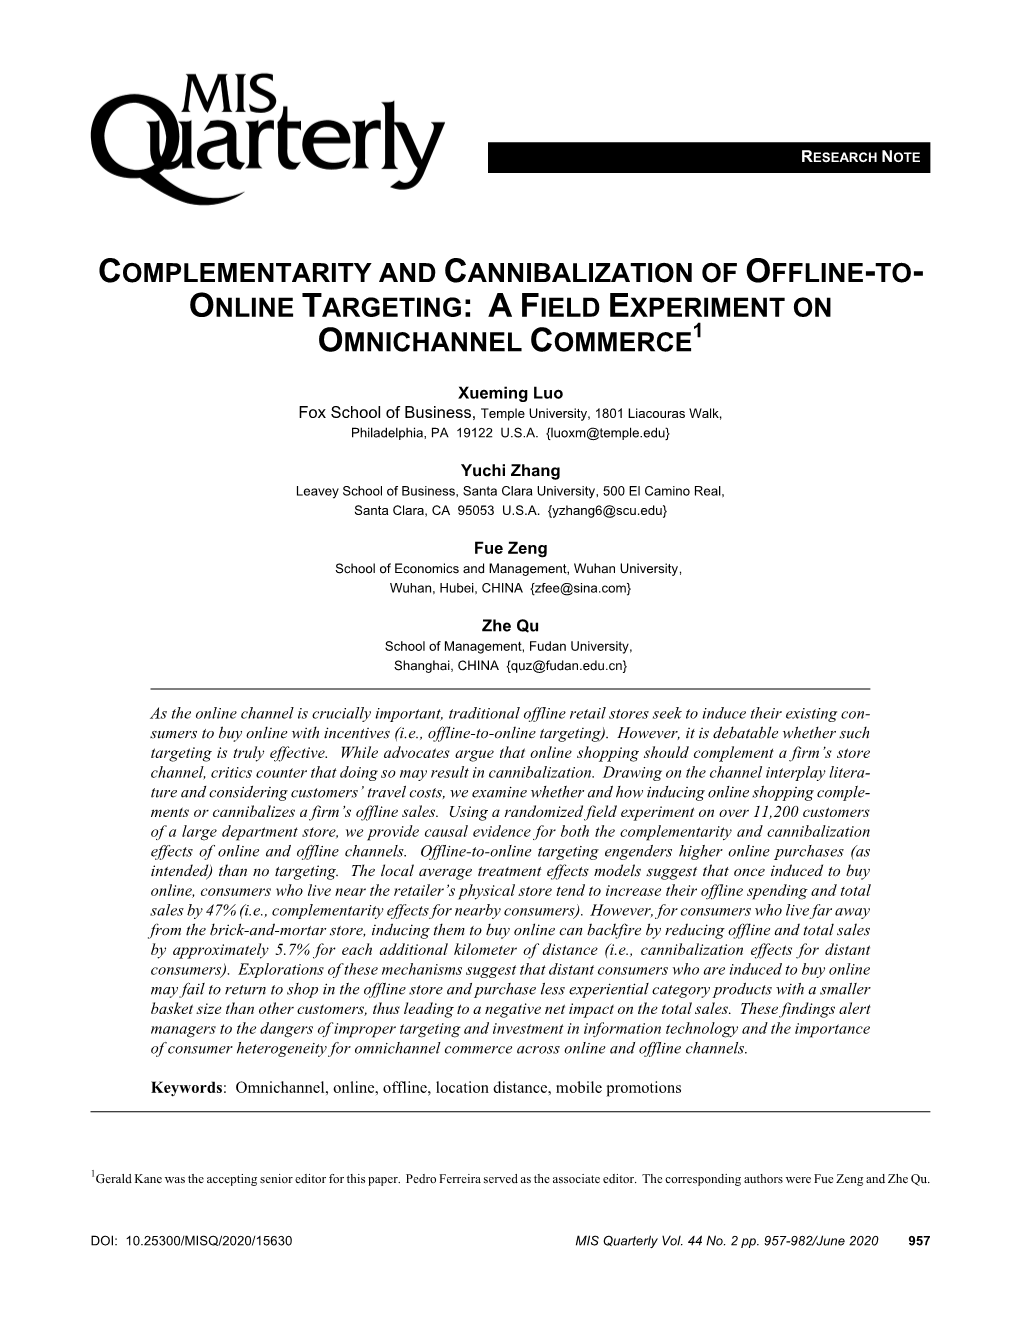 Complementarity and Cannibalization of Offline-To-Online Targeting